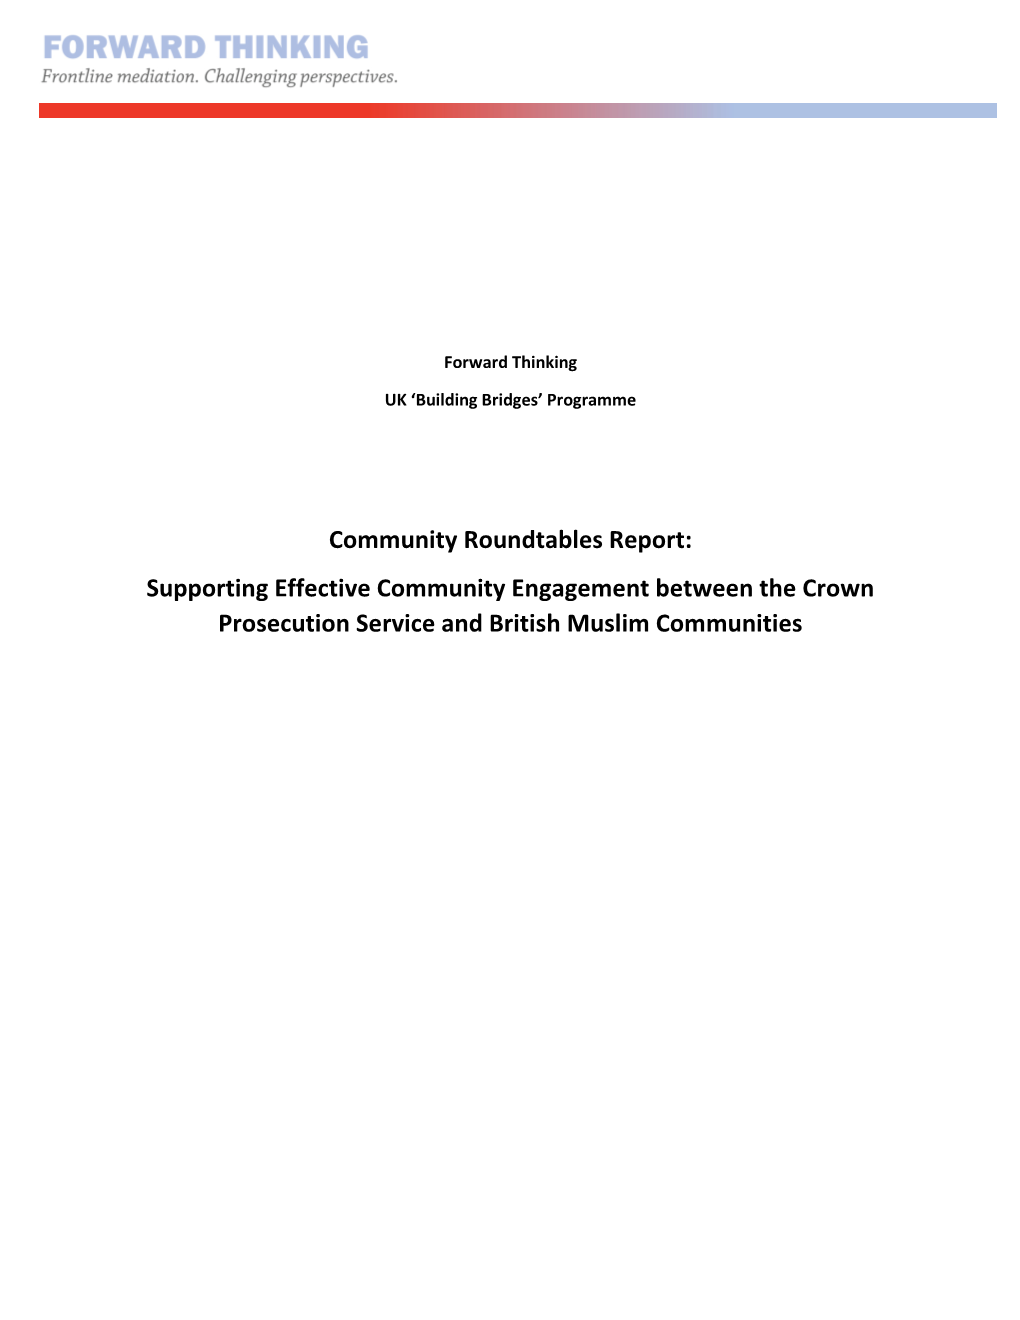 Community Roundtables Report: Supporting Effective Community Engagement Between the Crown Prosecution Service and British Muslim Communities